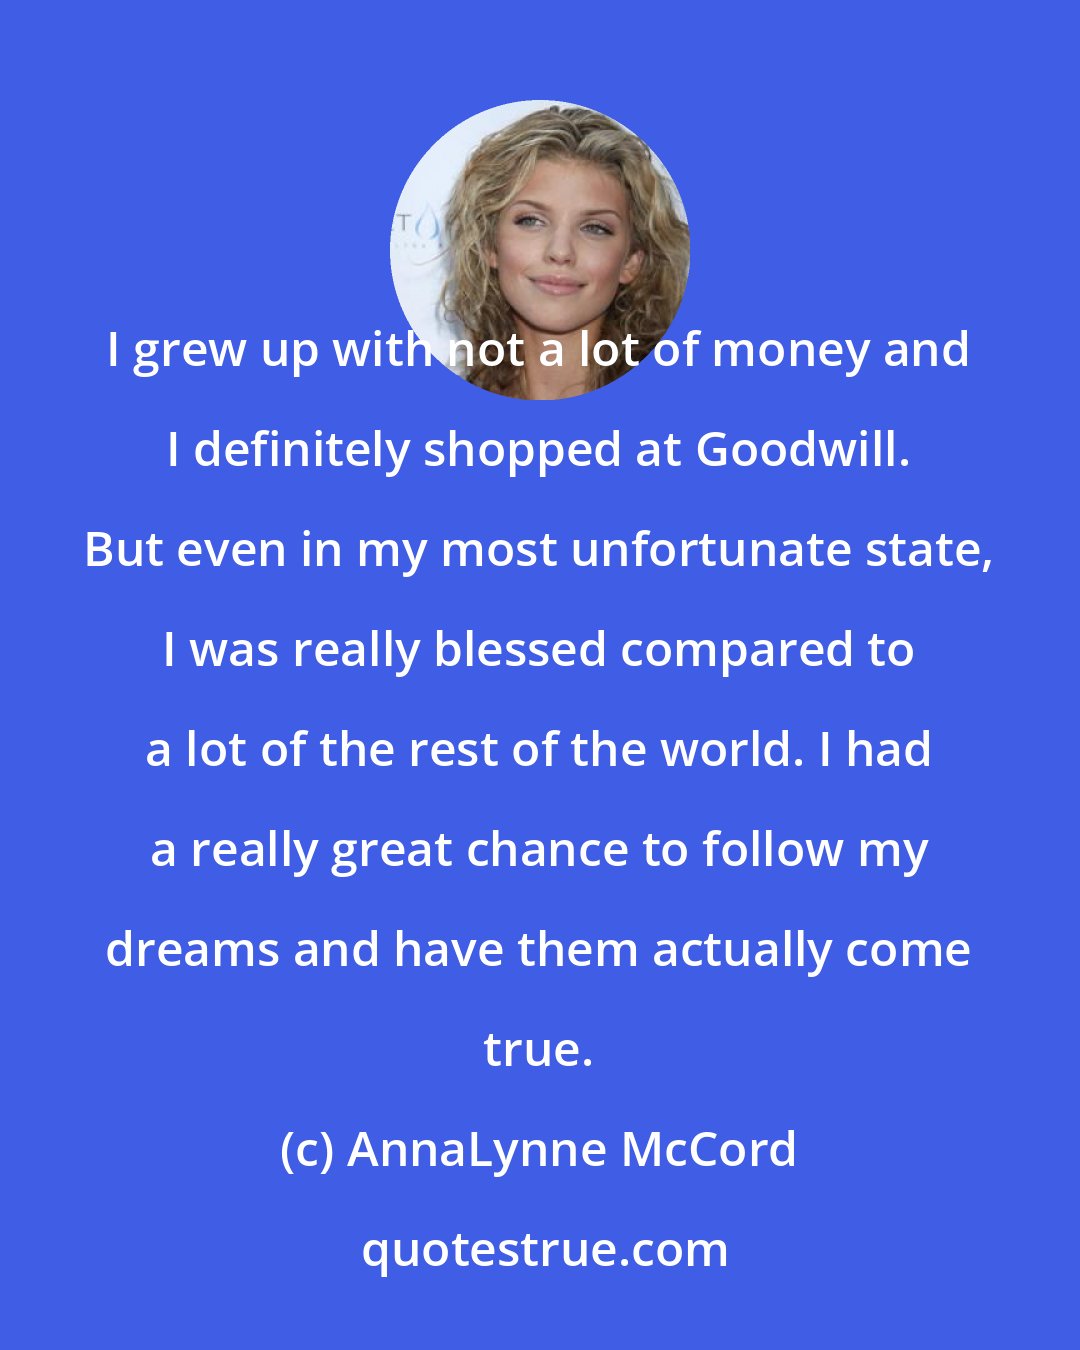 AnnaLynne McCord: I grew up with not a lot of money and I definitely shopped at Goodwill. But even in my most unfortunate state, I was really blessed compared to a lot of the rest of the world. I had a really great chance to follow my dreams and have them actually come true.